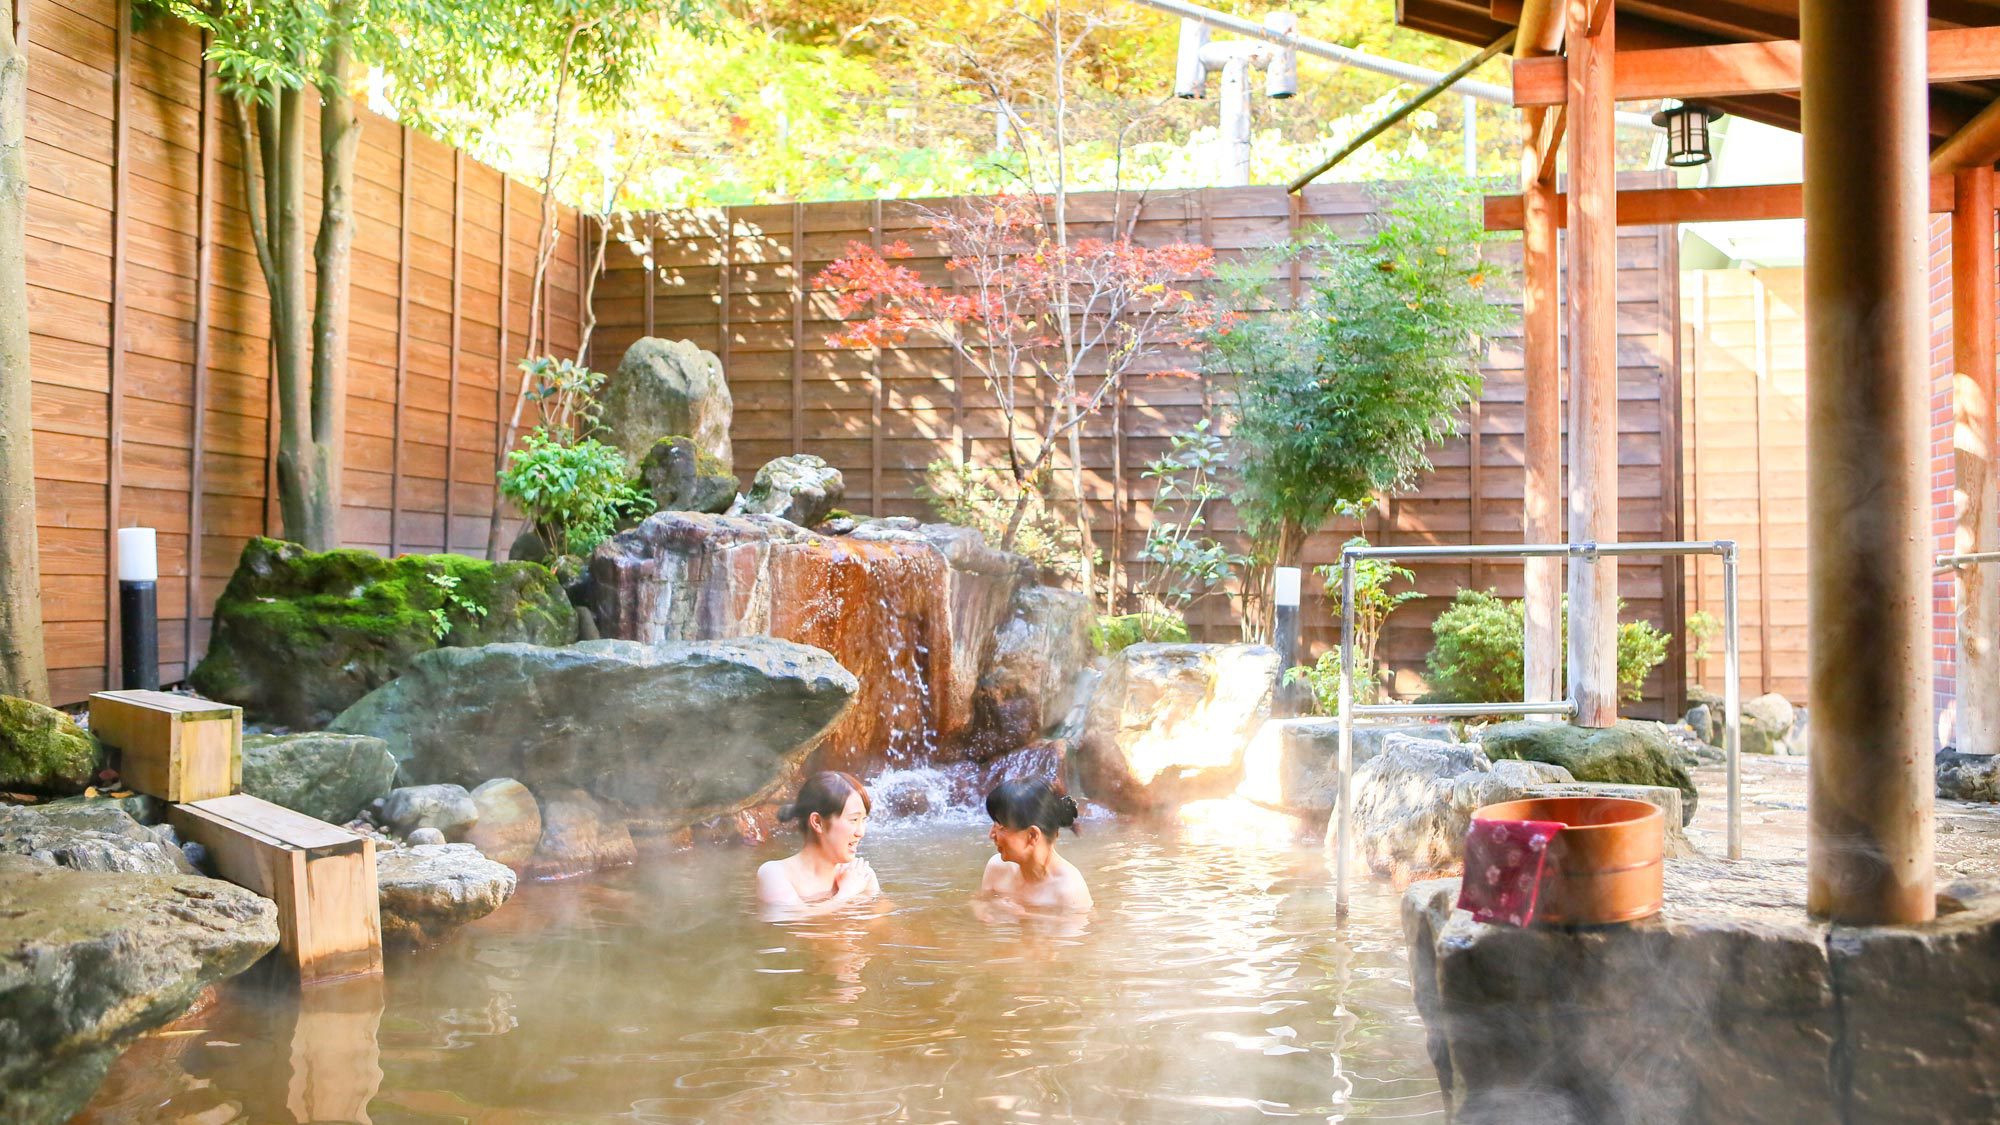 Oedo Onsen Monogatari Ikaho Onsen Ikaho Oedo Onsen Monogatari Ikaho Onsen Ikaho is a popular choice amongst travelers in Shibukawa, whether exploring or just passing through. Offering a variety of facilities and services, the property provi